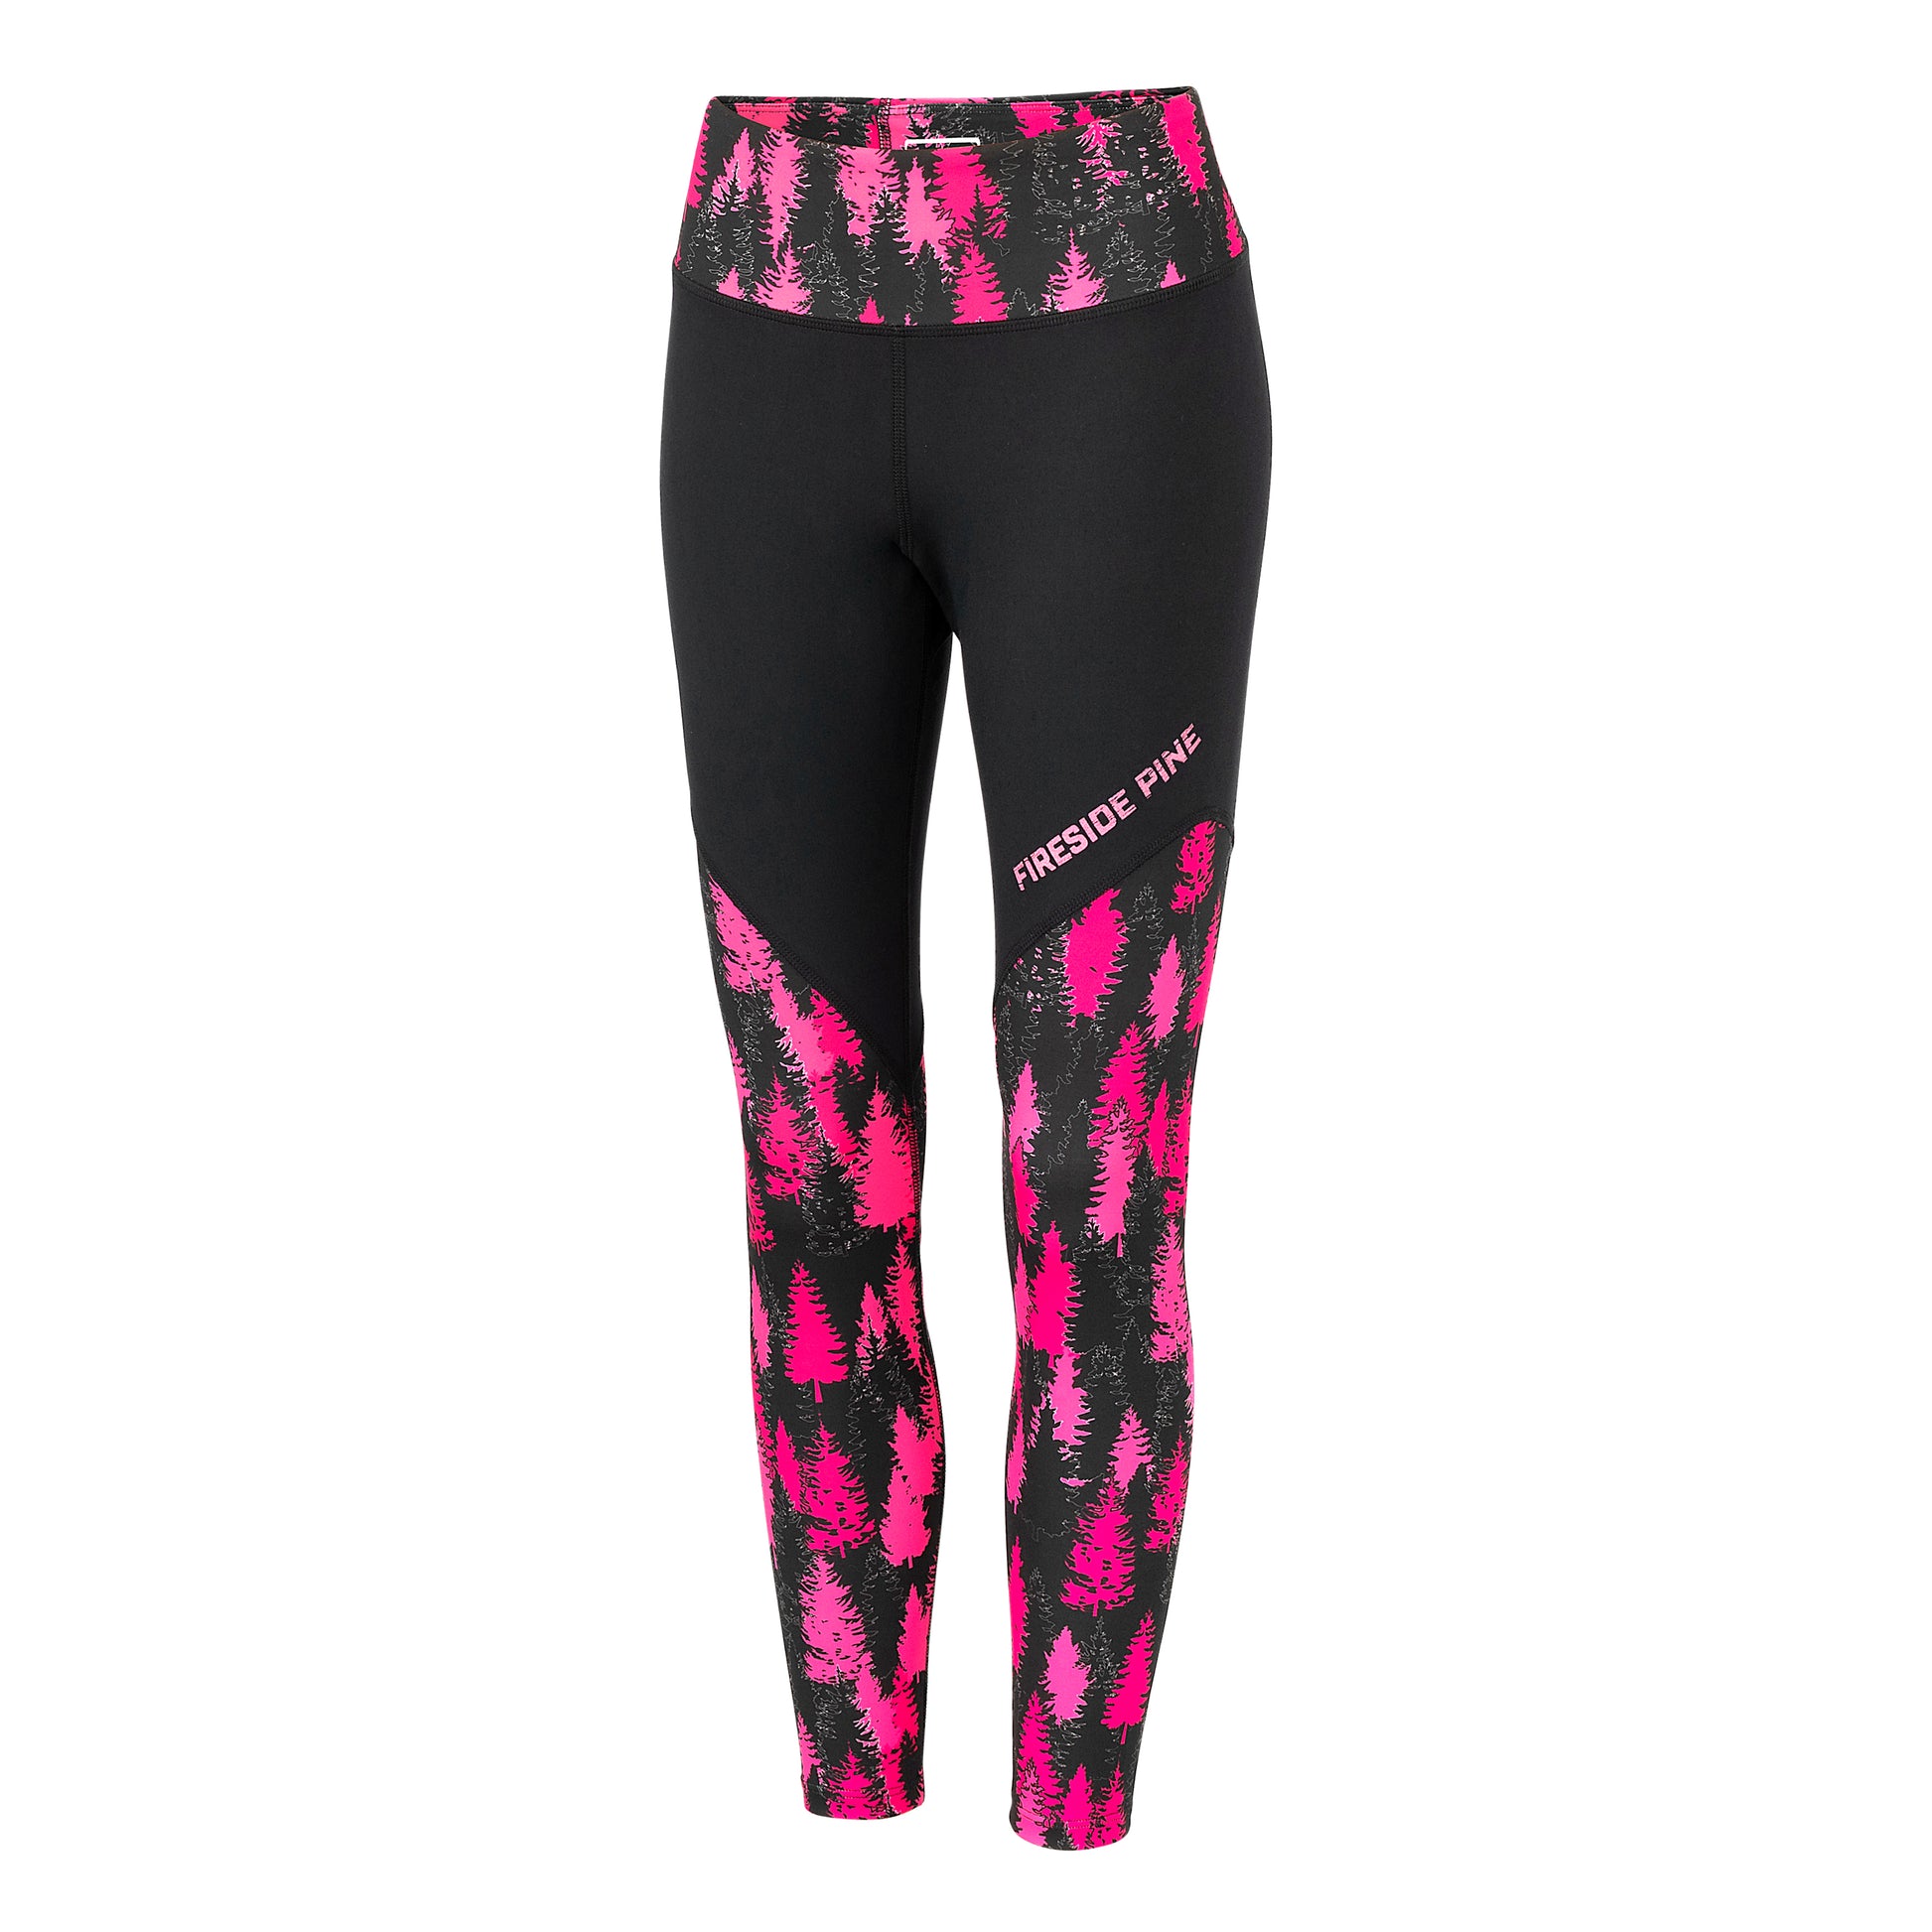 Made in USA 7/8 Pink and Black Aspen Leggings. Crafted with care from a premium blend of materials. With a mid to high-rise waist, they provide just the right amount of coverage and support. The 7/8 length design adds a trendy touch to your look. These leggings feature a hot pink color scheme graphic pine tree pattern. Front View.